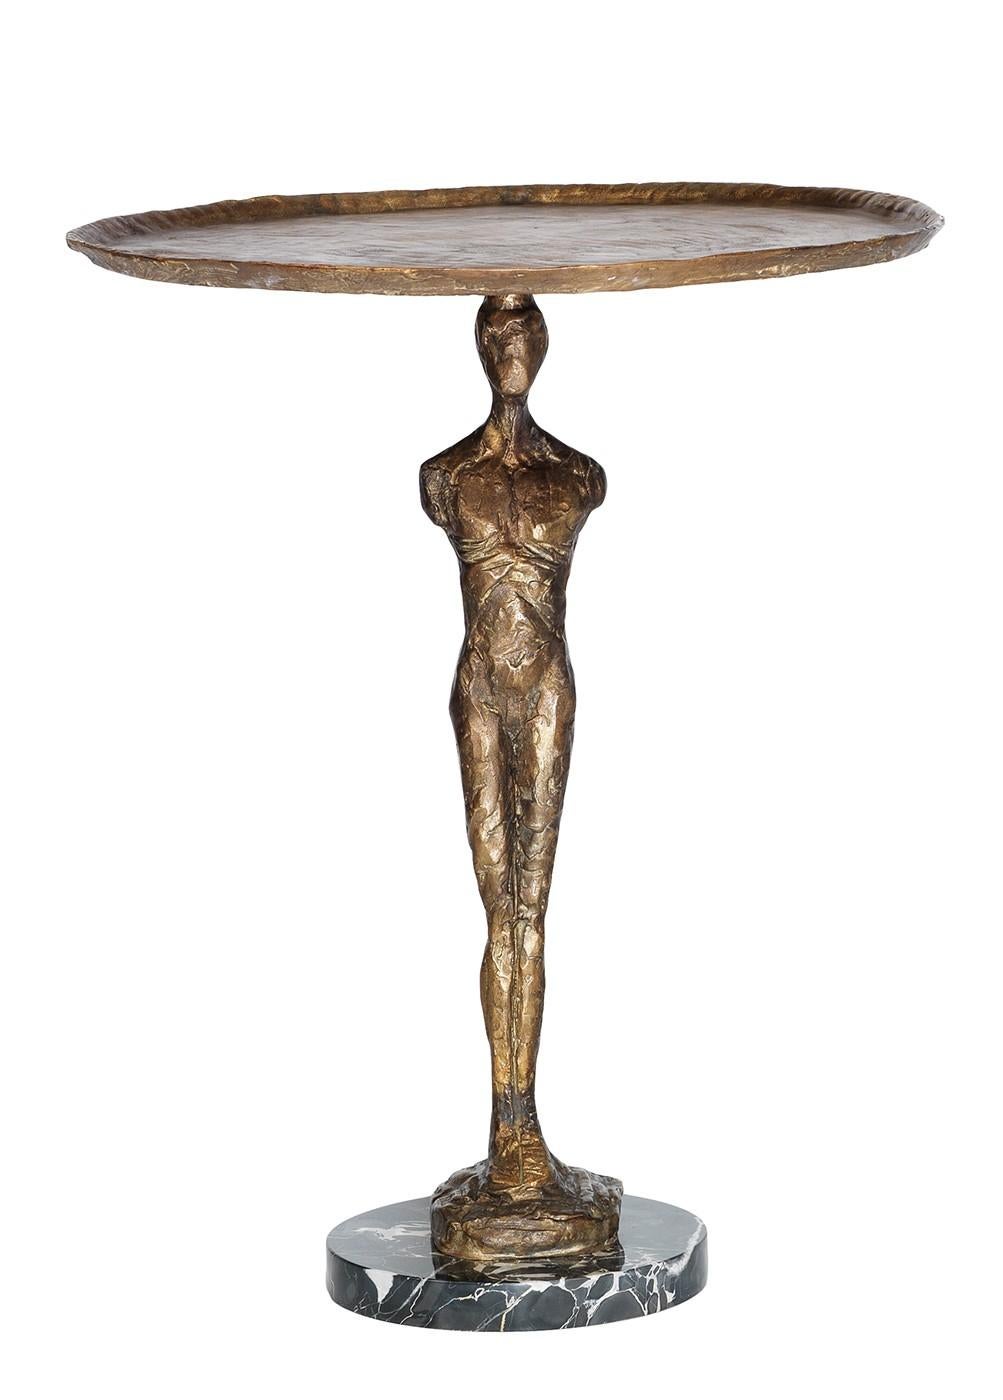 Evoking the simplicity and elegance of neoclassic designs, this table will add a sophisticated touch to any decor. The balanced design features a beveled tray supported by the athletic Silhouette of a man reminiscent of ancient Greek statuary. The